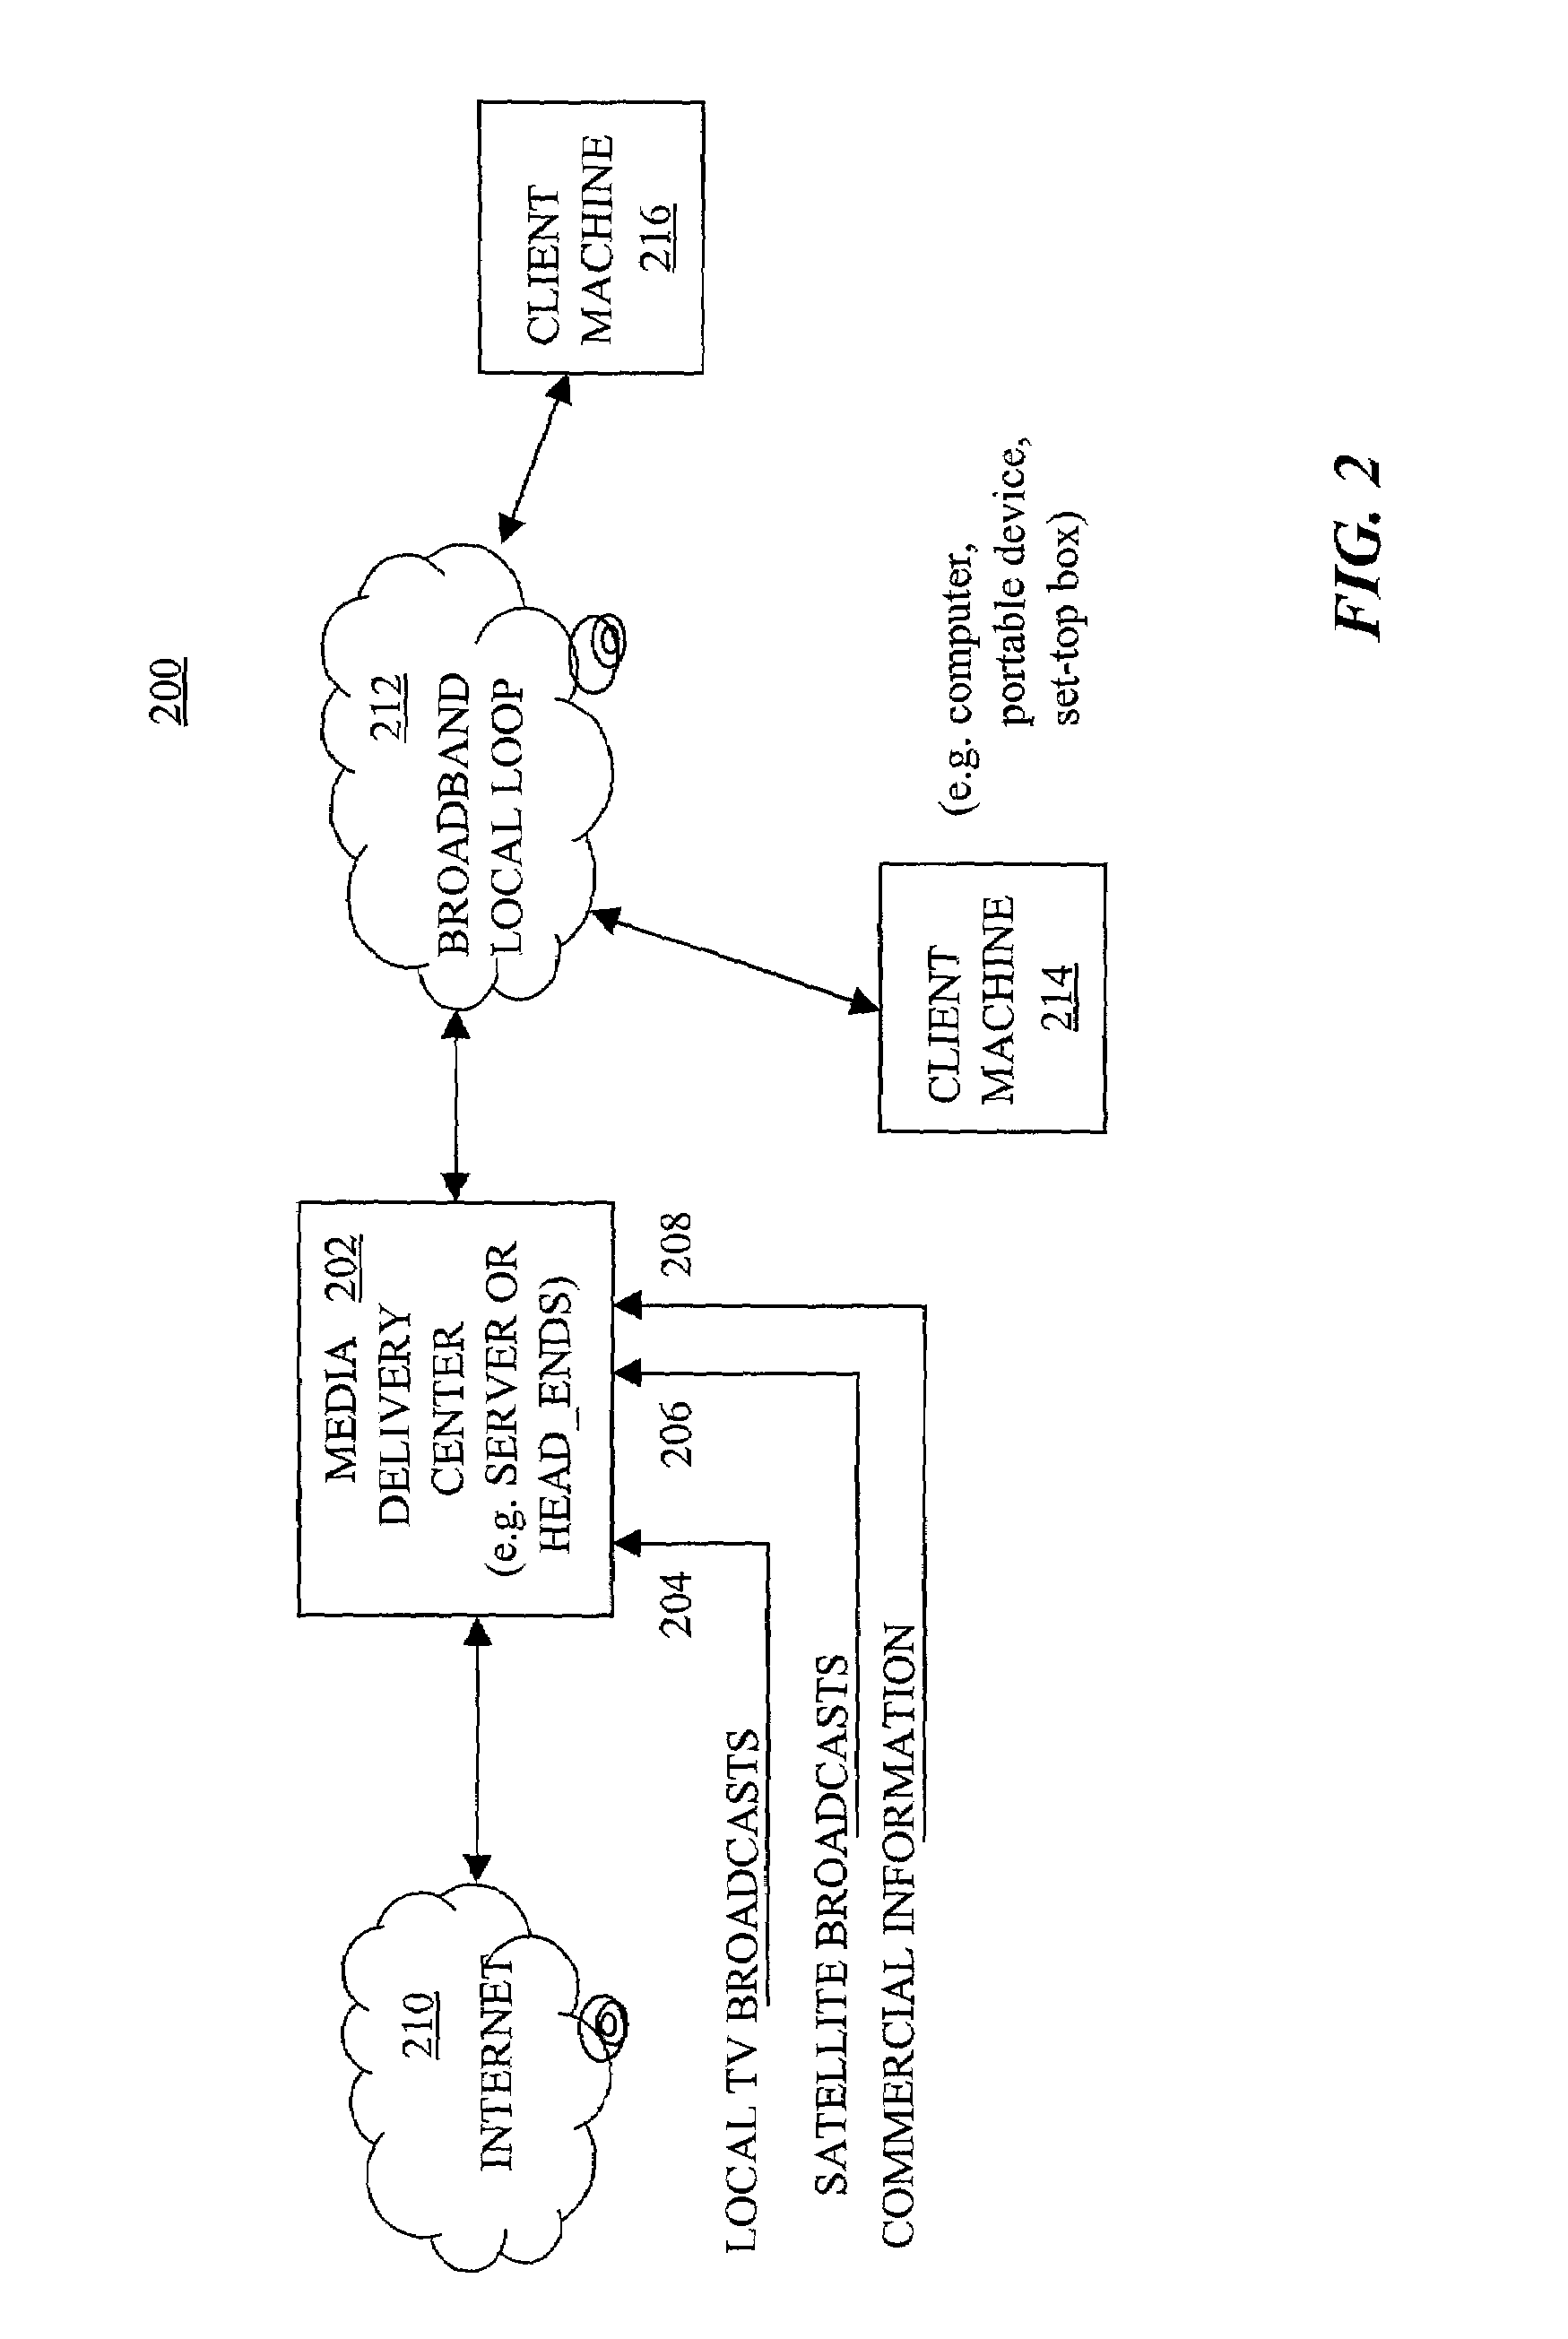 Method and system for providing time-shifted delivery of live media programs